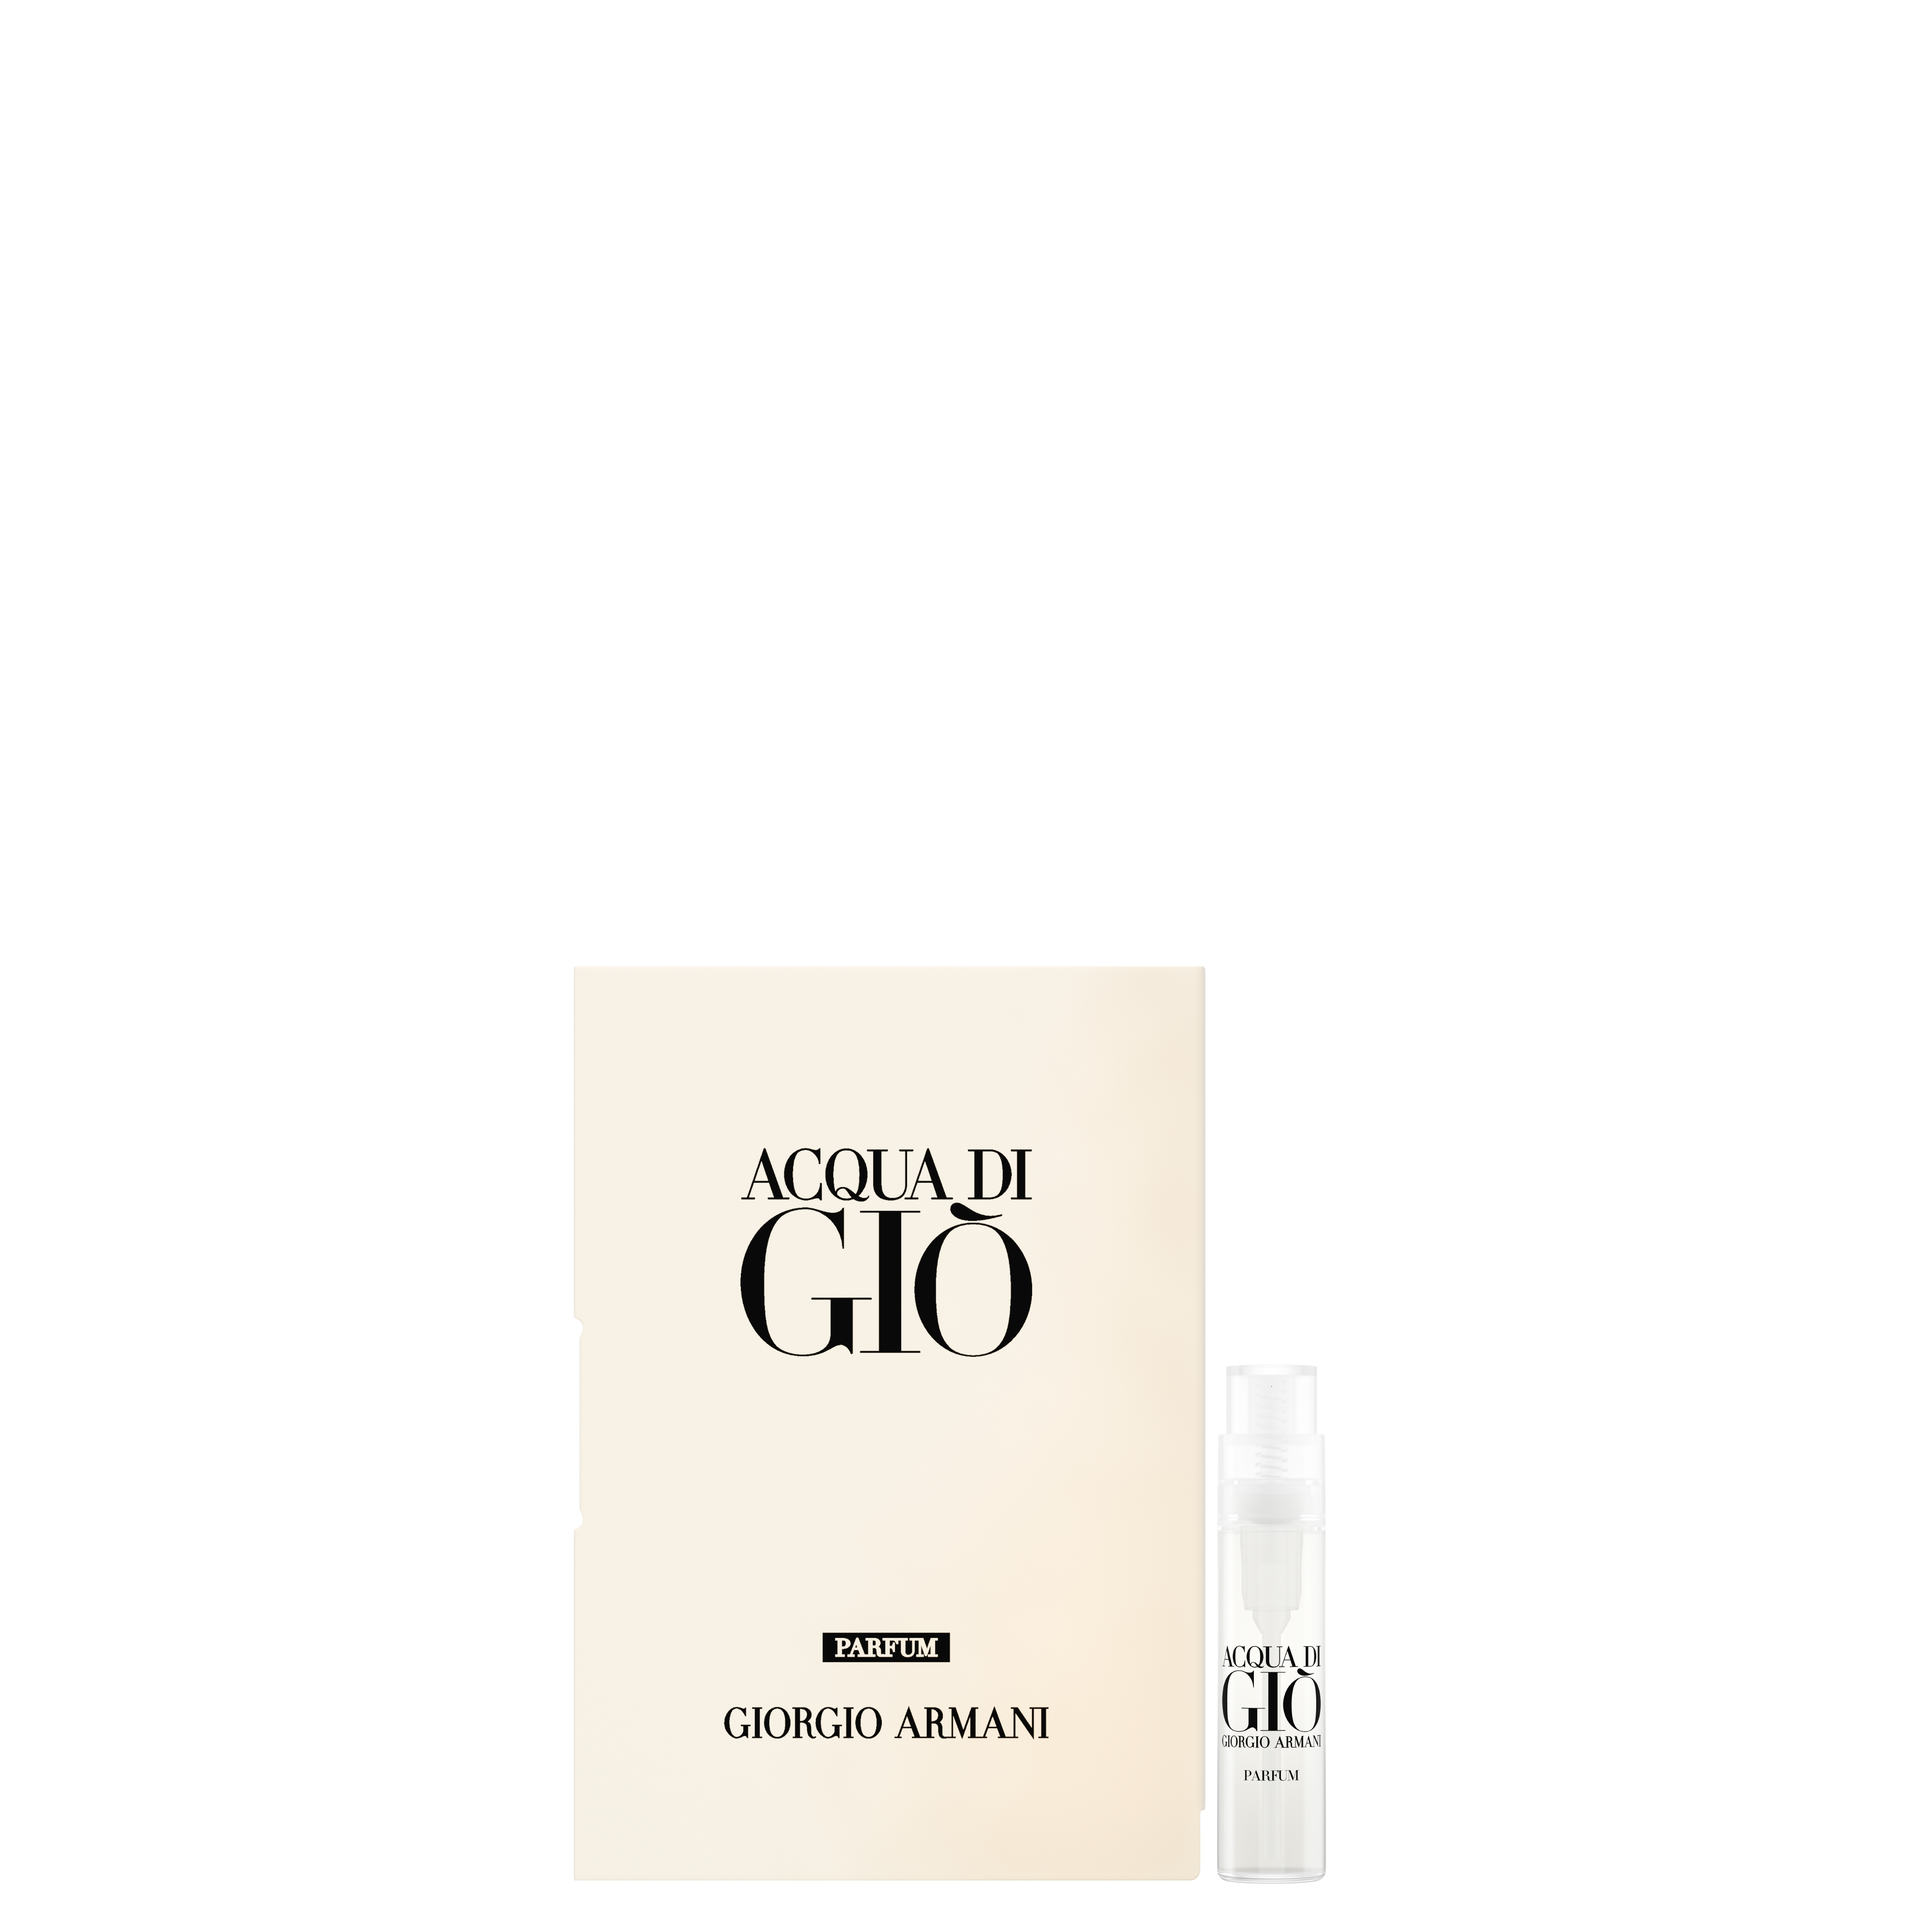 Purchase Armani Acqua di Giò Parfum And Receive A Sample Size To Try